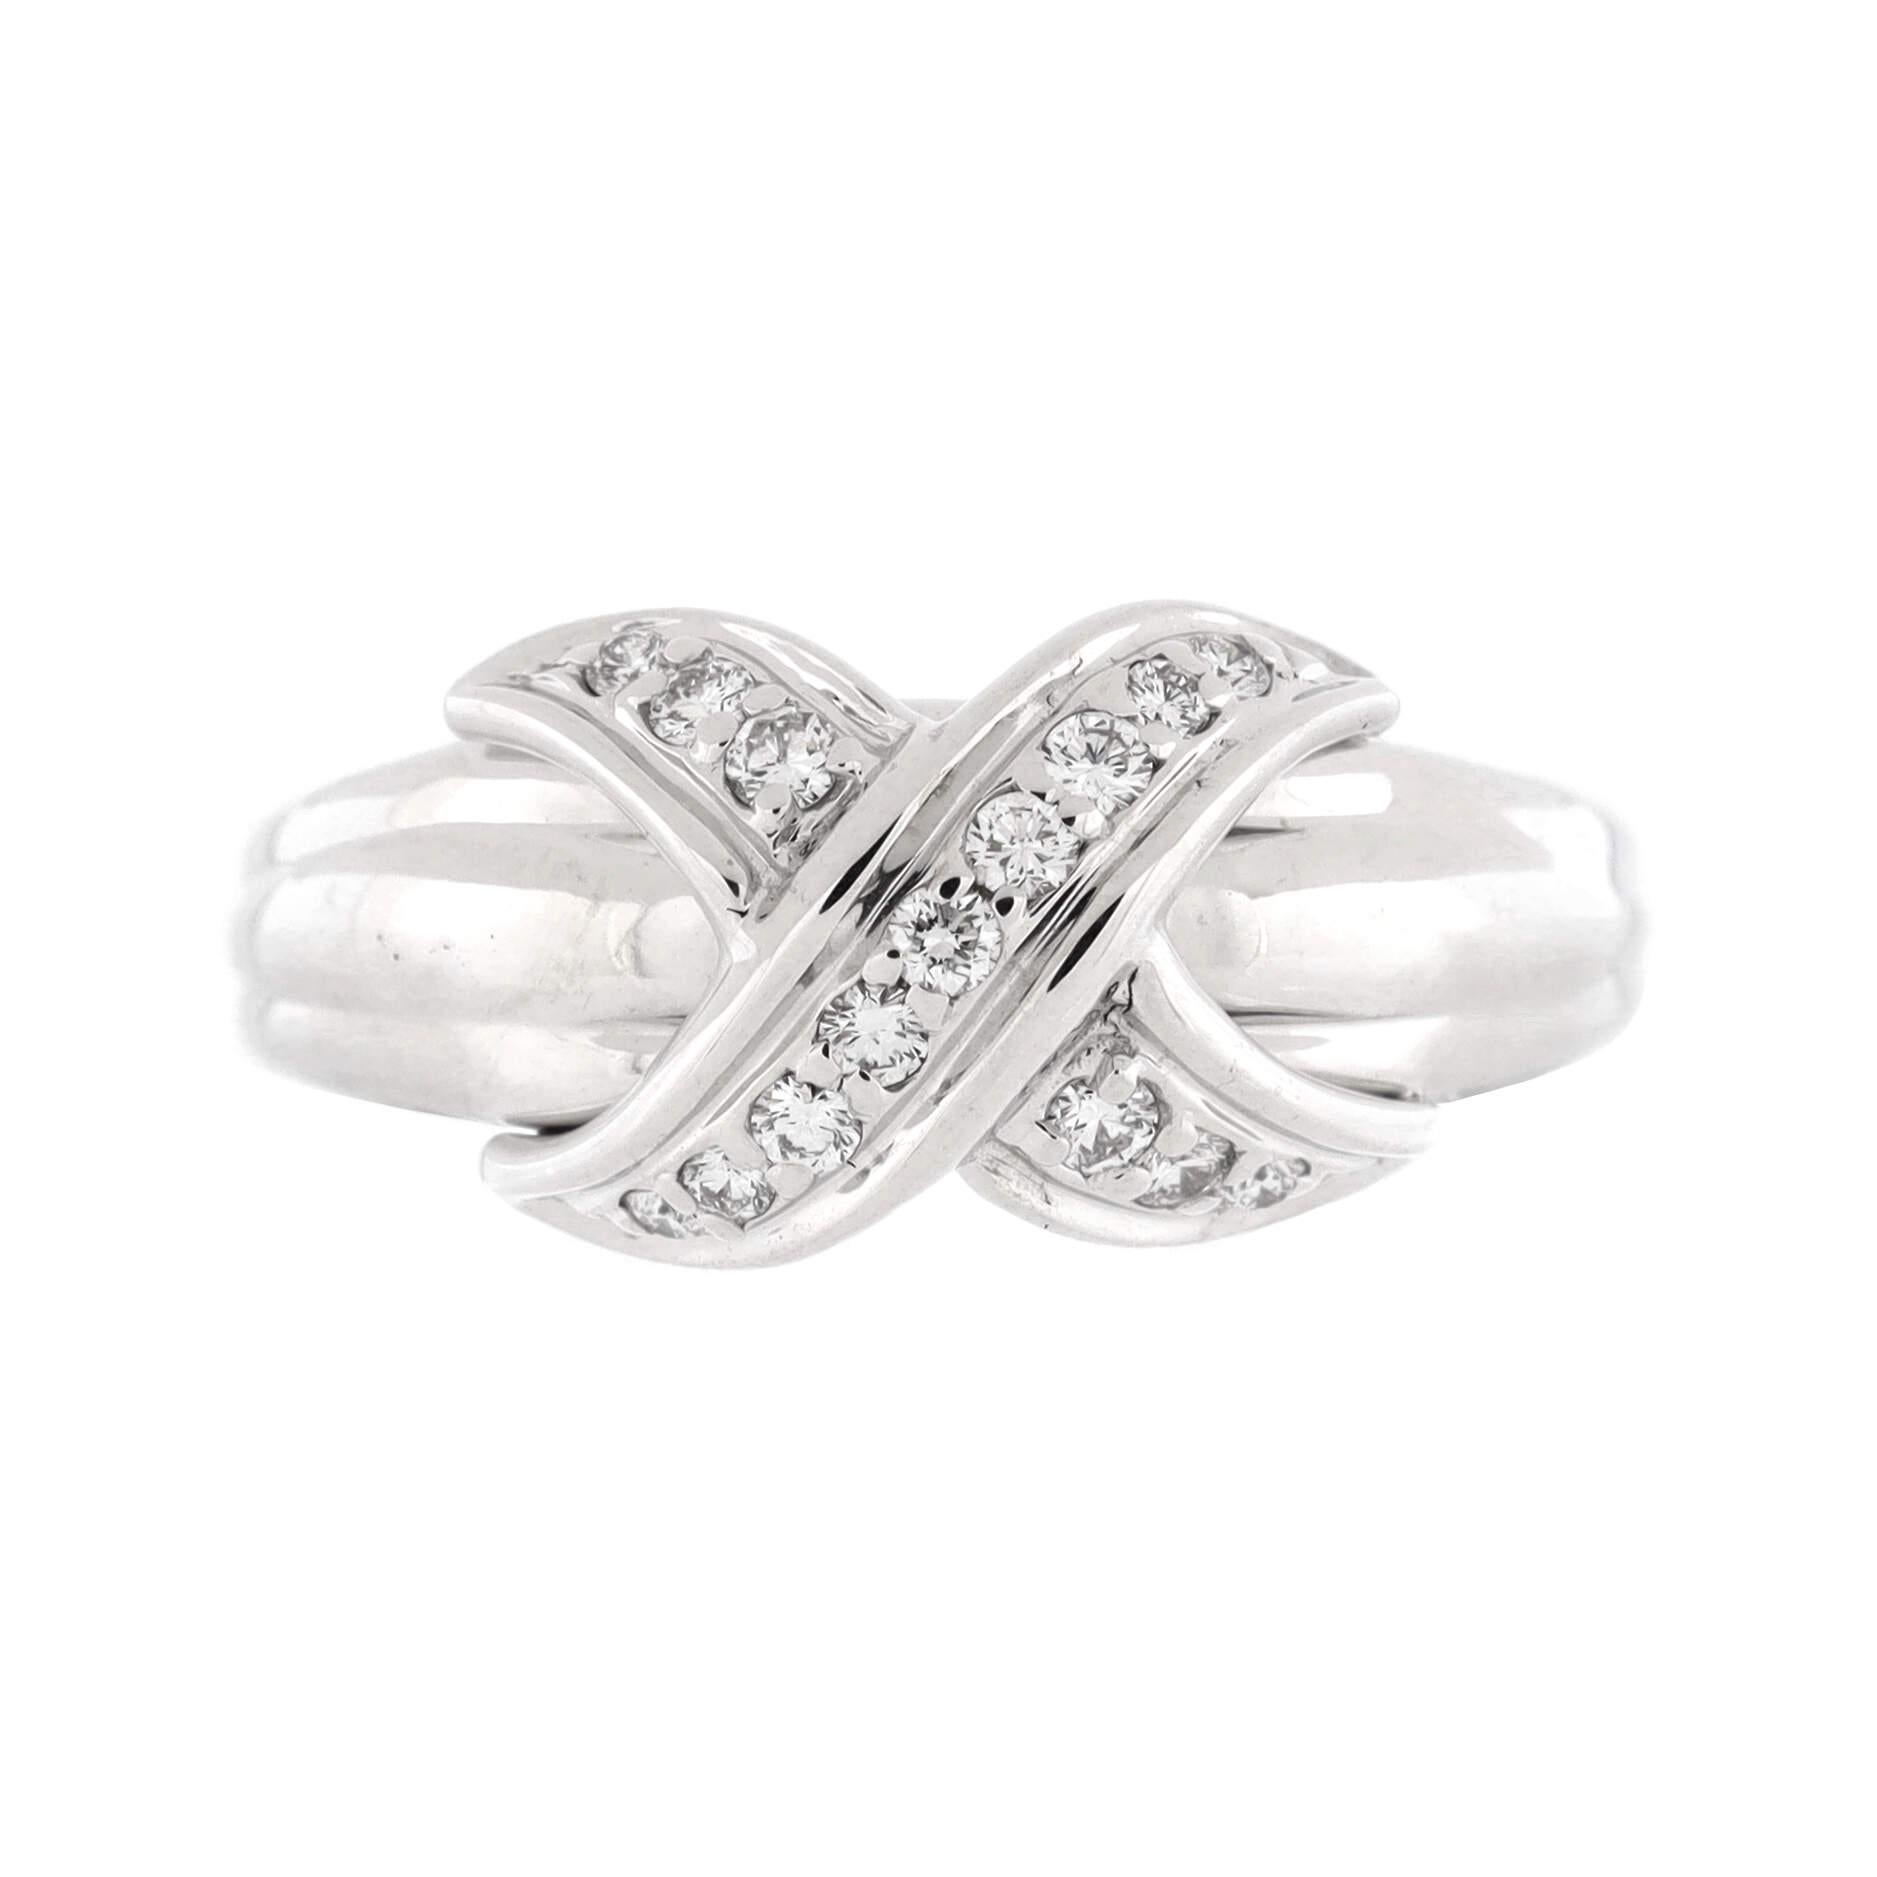 Condition: Good. Moderately heavy wear throughout commensurate with age.
Accessories: No Accessories
Measurements: Size: 6.5, Width: 3.00 mm
Designer: Tiffany & Co.
Model: Signature X Ring 18K White Gold and Diamonds
Exterior Color: White Gold
Item